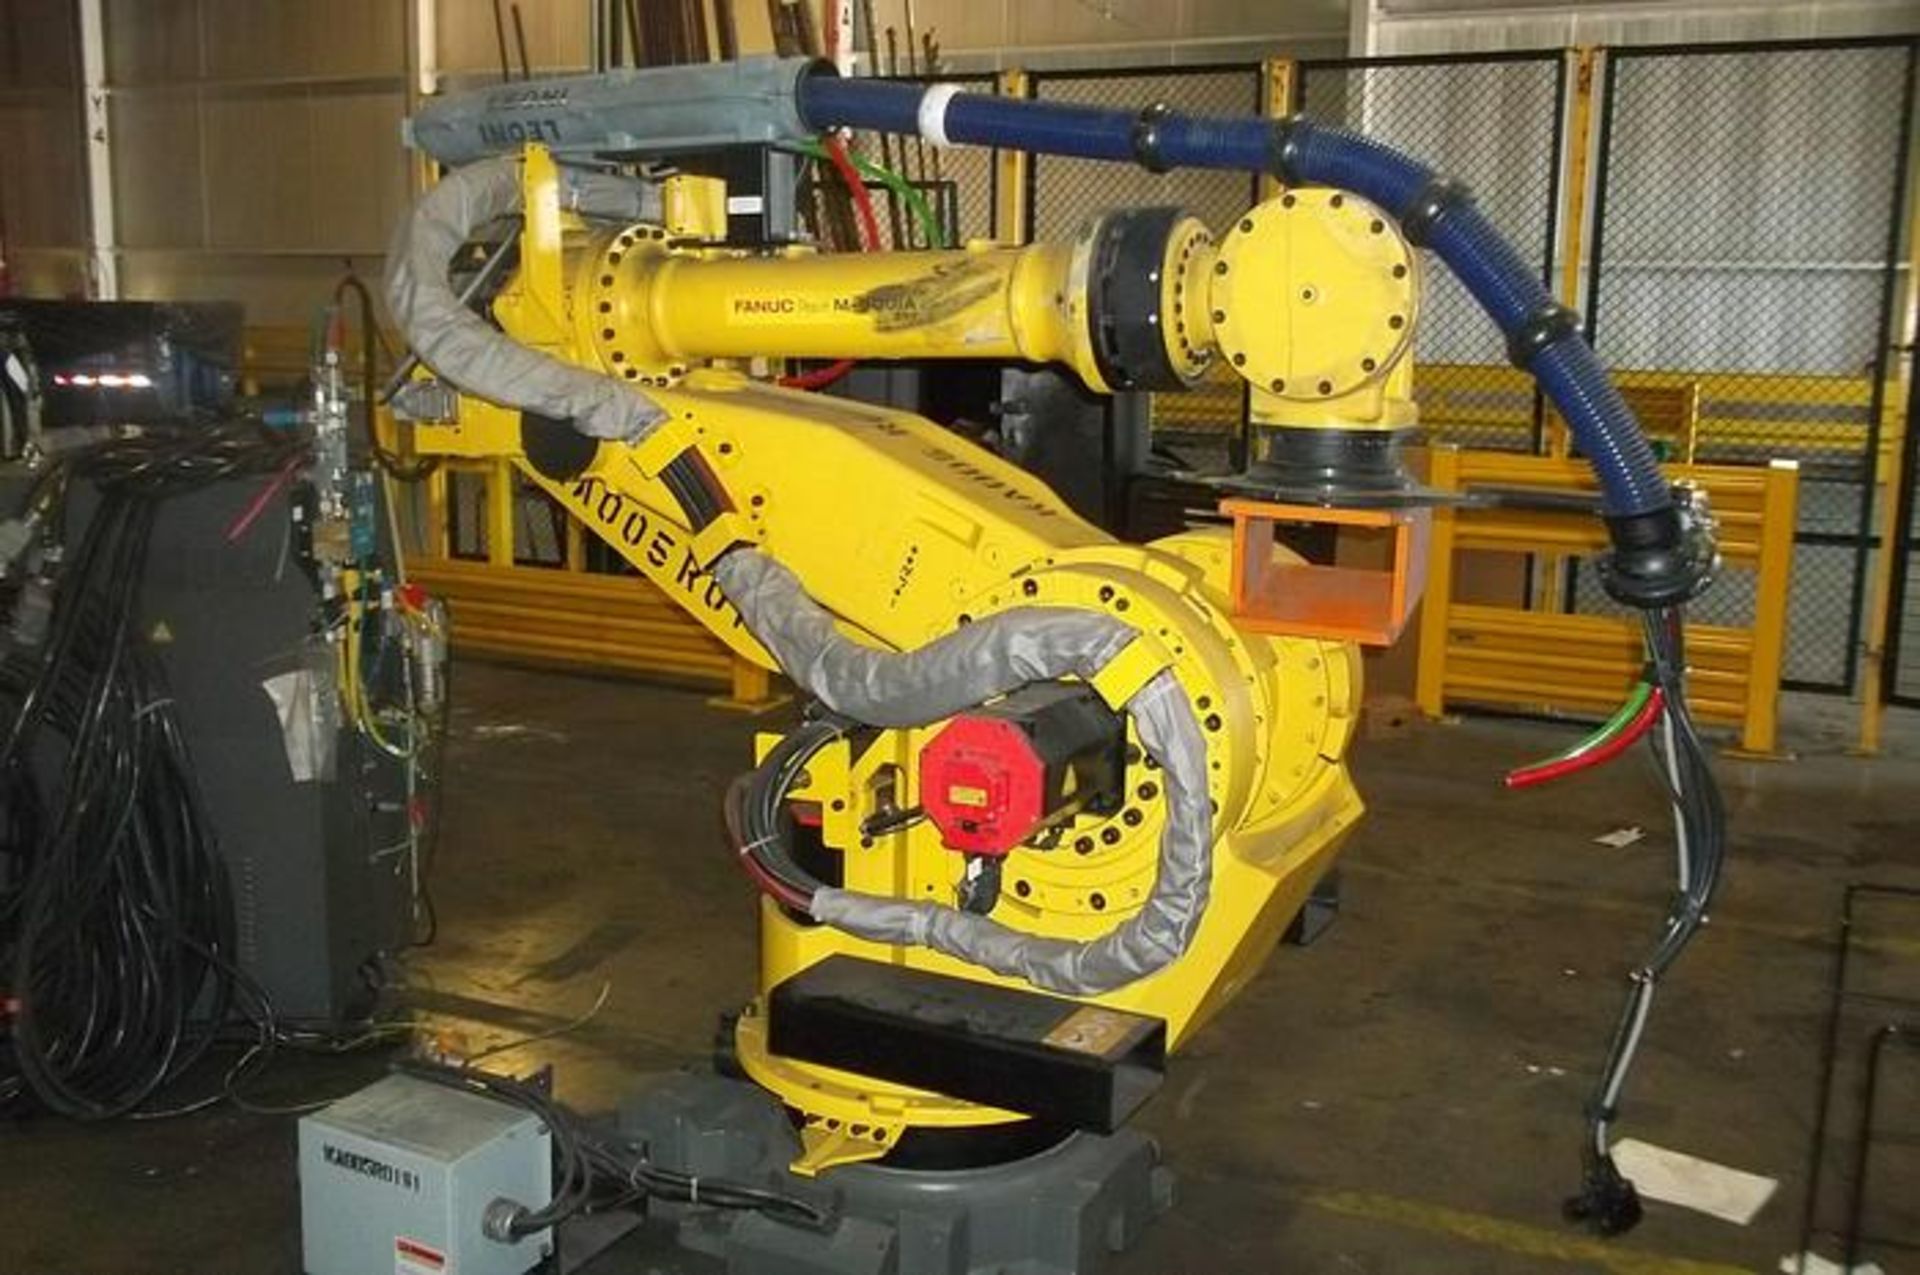 FANUC ROBOT M900iA/350 6 AXIS ROBOTS WITH R30iA CONTROLLERS, 350KG X 2650mm REACH - Image 3 of 12